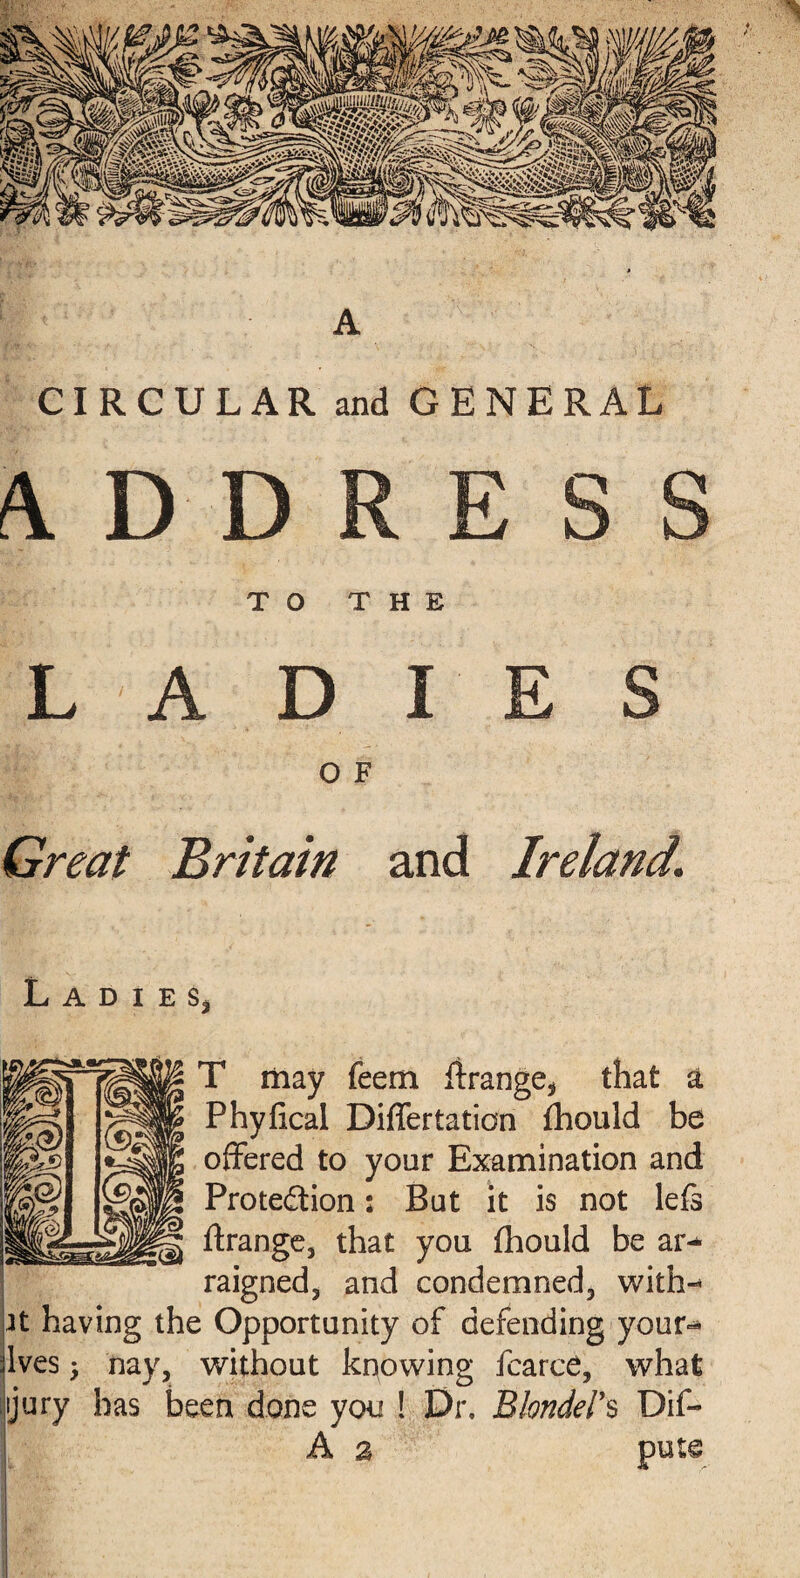 A CIRCULAR and GENERAL TO THE LADIES O F Great Britain and Ireland. L A D I E Sj T may feem ftrange* that a Phyiical Differtation fhould be offered to your Examination and Protection: But it is not lefs ftrange, that you fhould be ar¬ raigned 3 and condemned, with-* at having the Opportunity of defending your** jives 3 nay, without knowing fearce, what jury has been done you ! Dr. Blonders Dif-